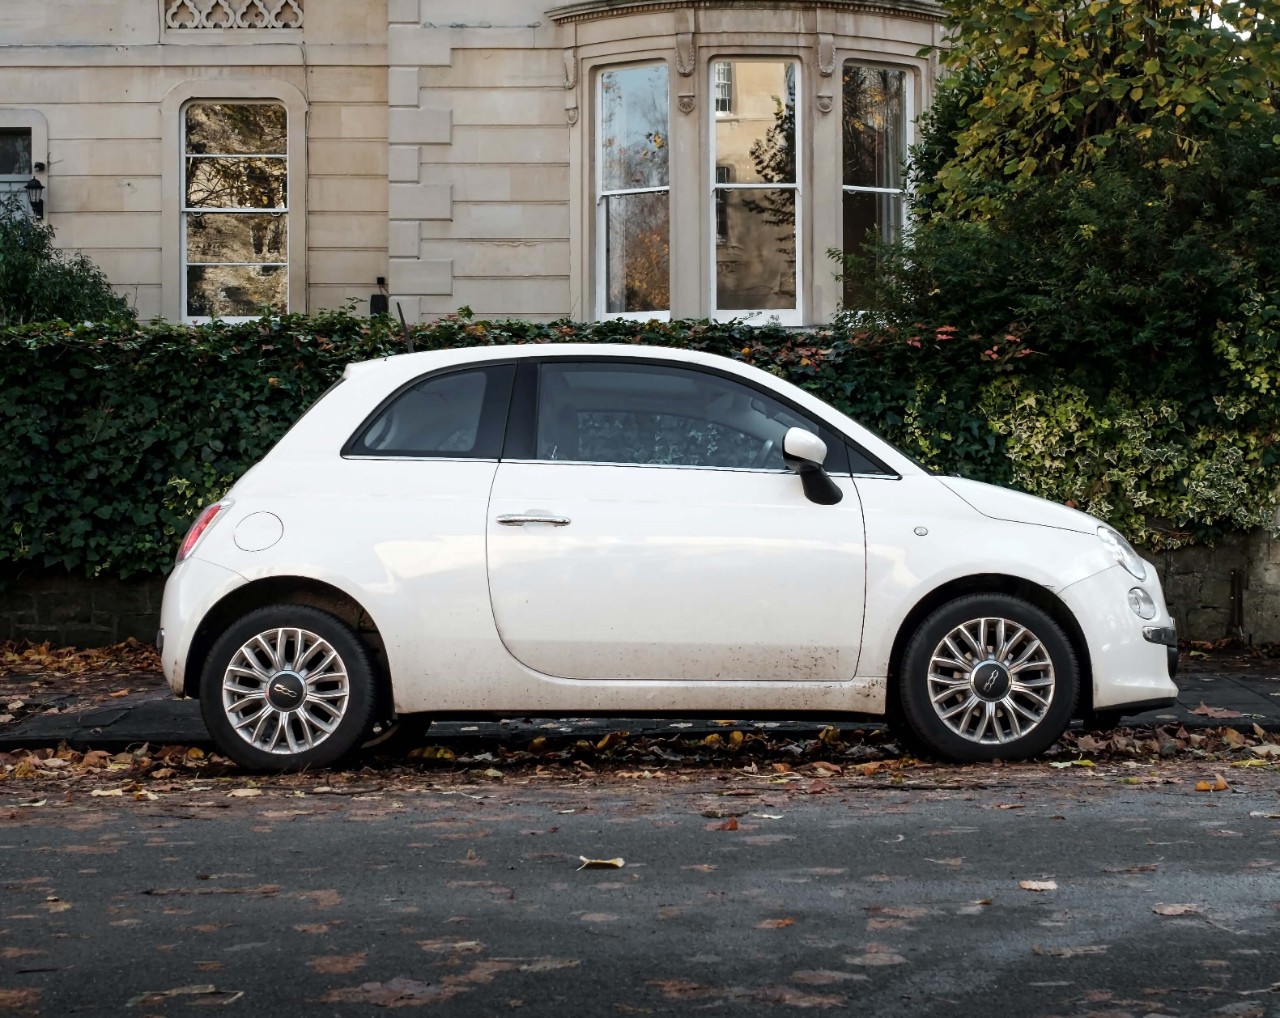 Fiat 500 fitted with Goodyear Tyres